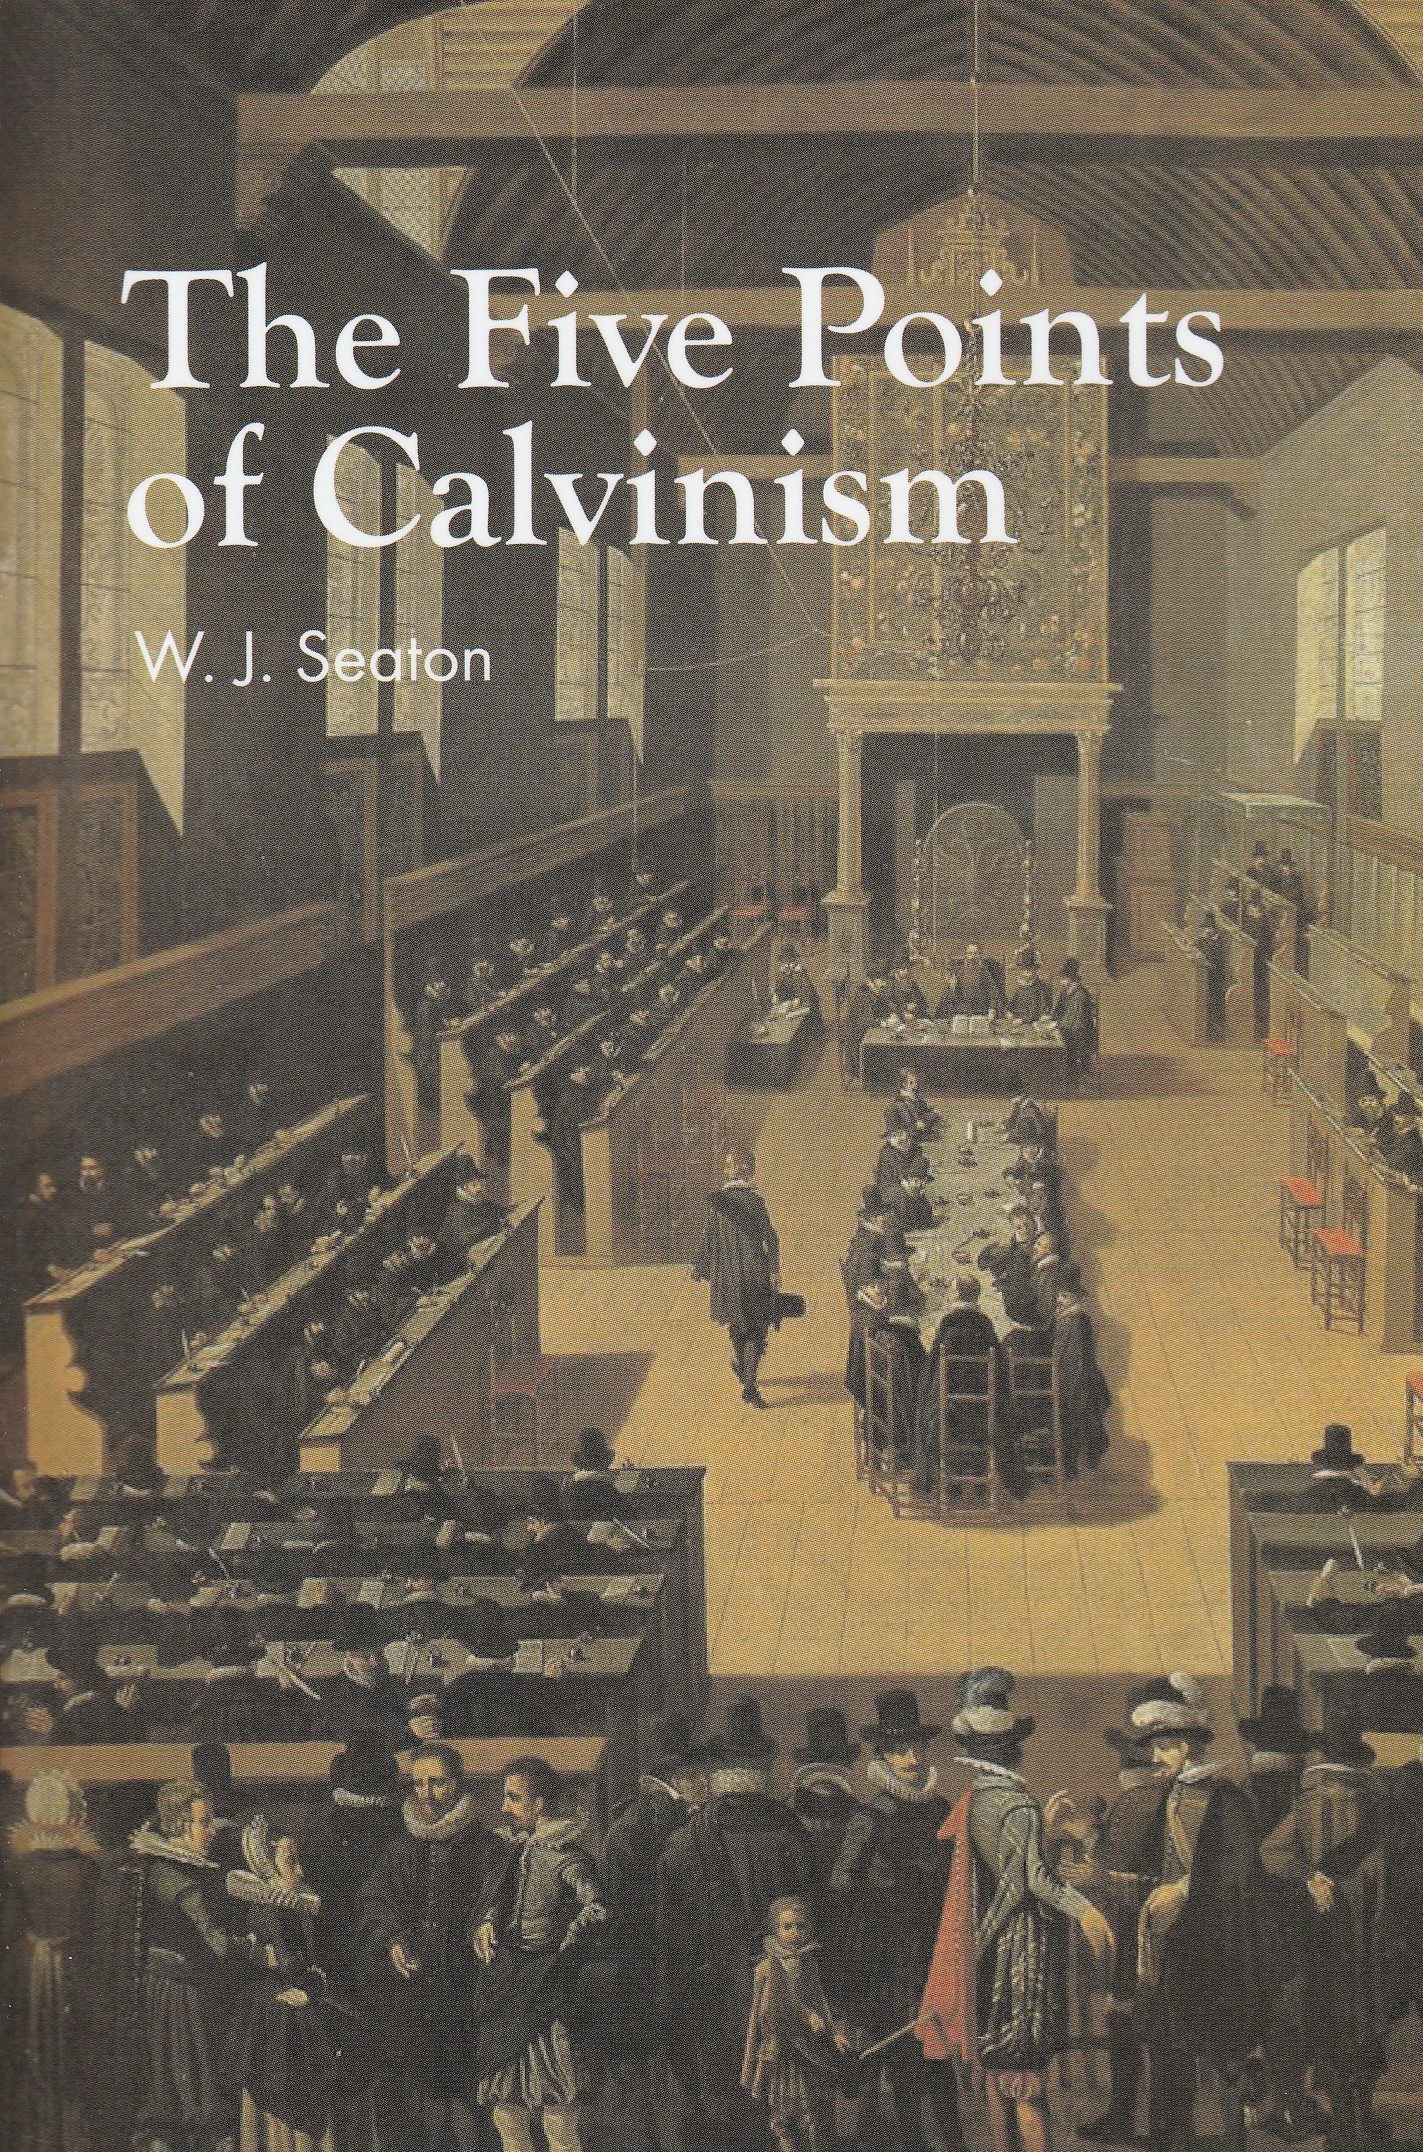 The Five Points of Calvinism (Seaton)